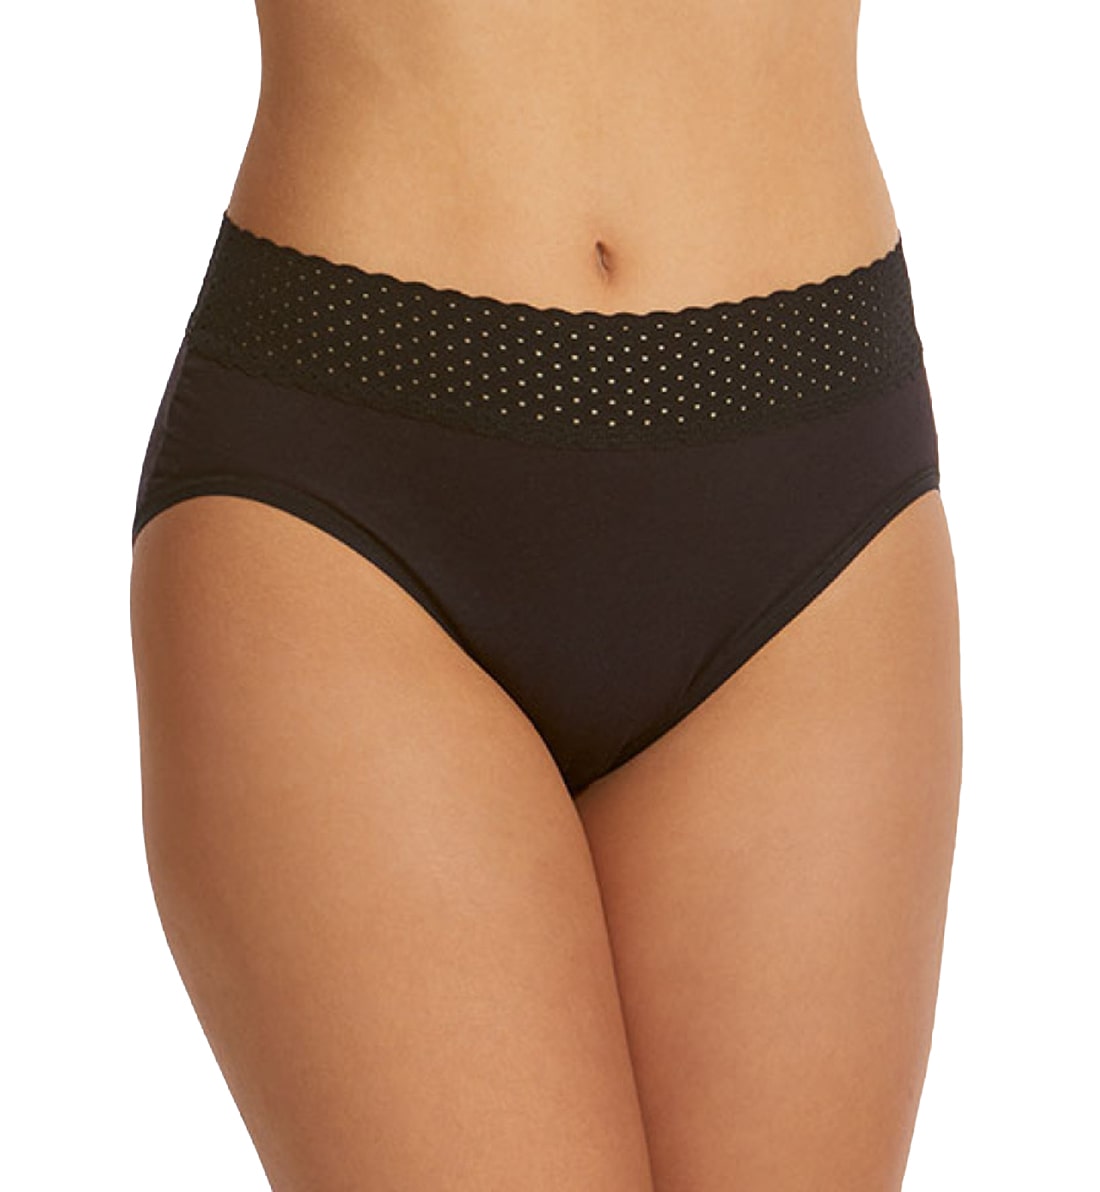 Hanky Panky Organic Cotton French Brief with Lace (792131),Small,Black - Black,Small